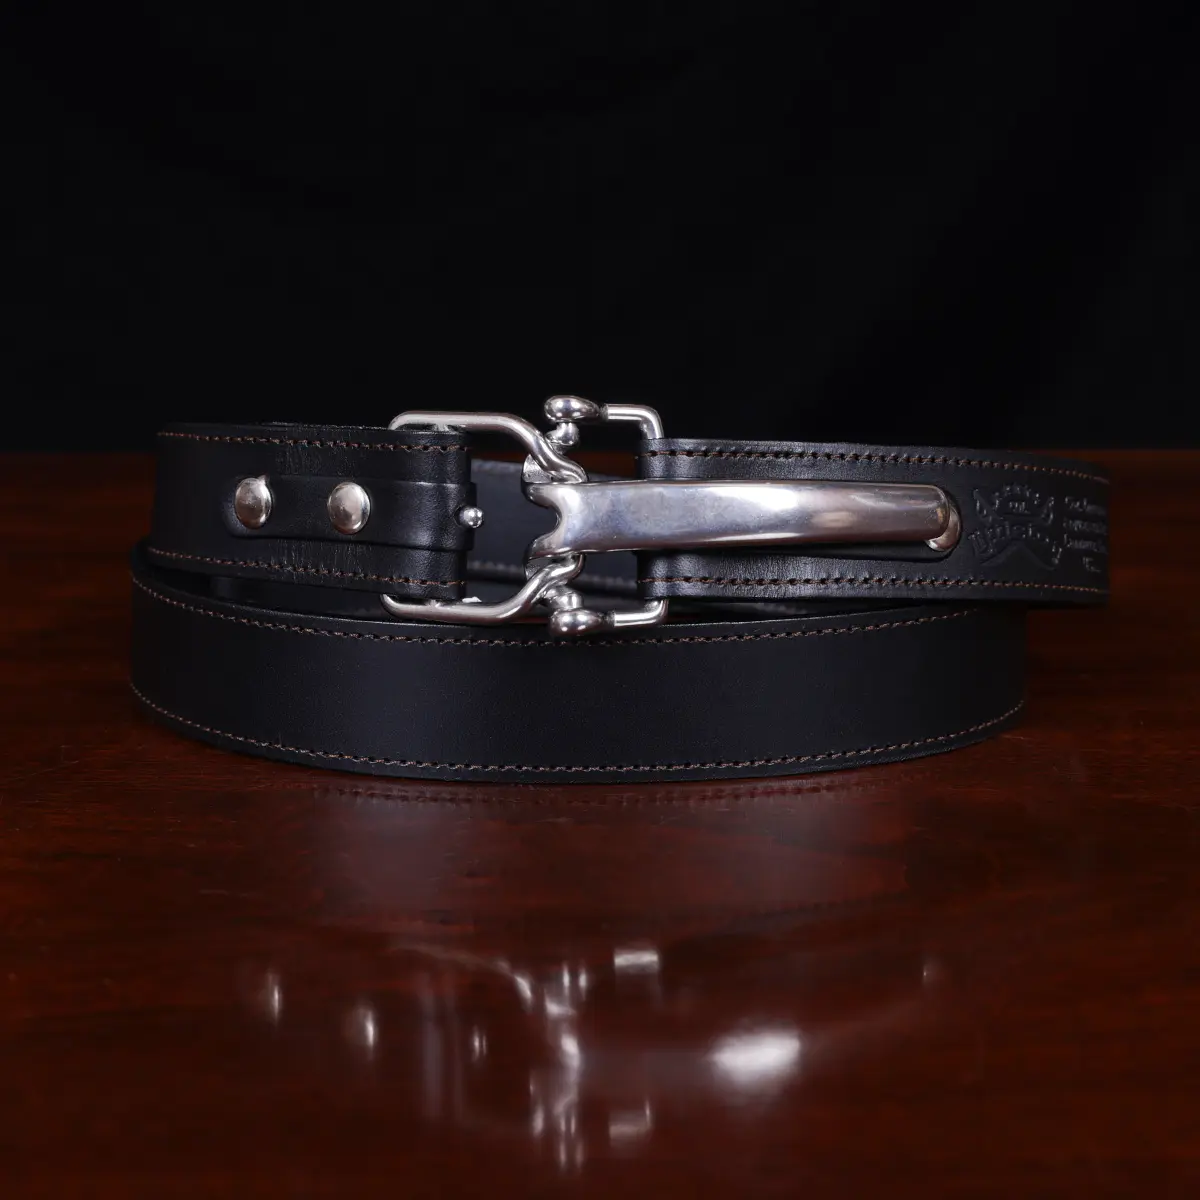 Leather Belt with Gold Buckle XL / Black